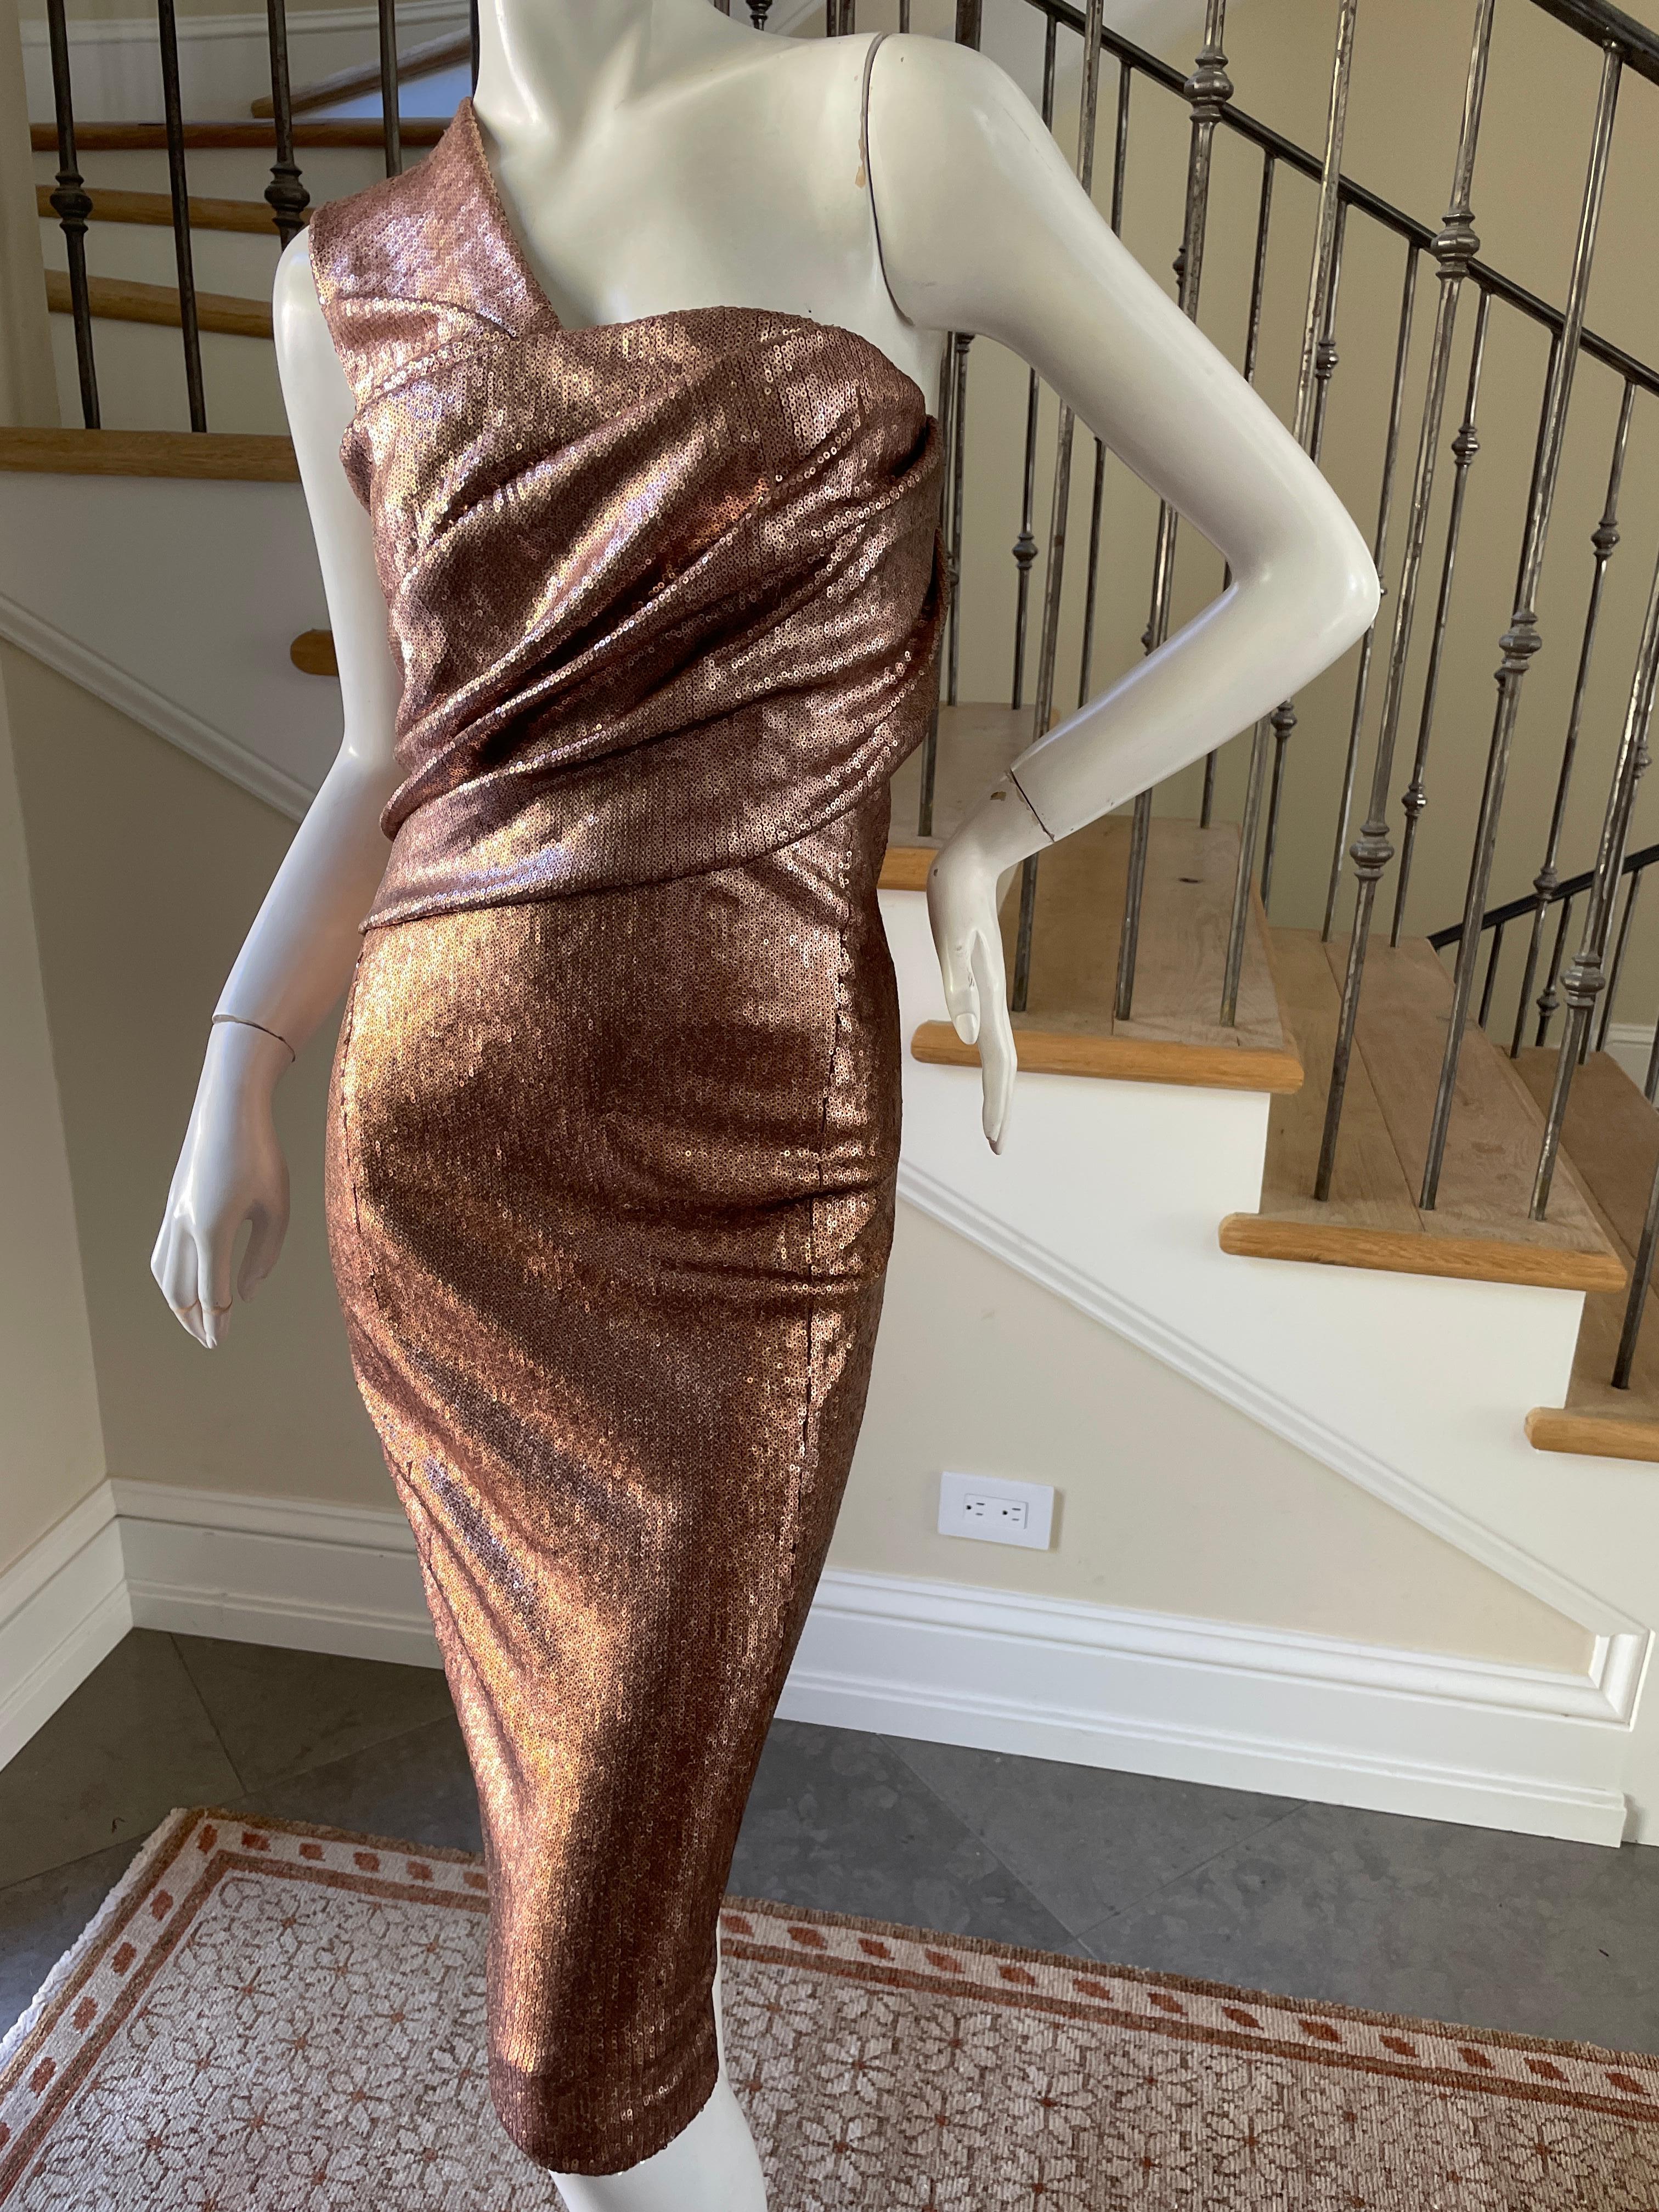 Donna Karan Vintage Metallic Copper Sequin One Shoulder Cocktail Dress.
New with tags  it retailed for $2195
This is so pretty. There is a lot of stretch.
Size 6
Bust 34